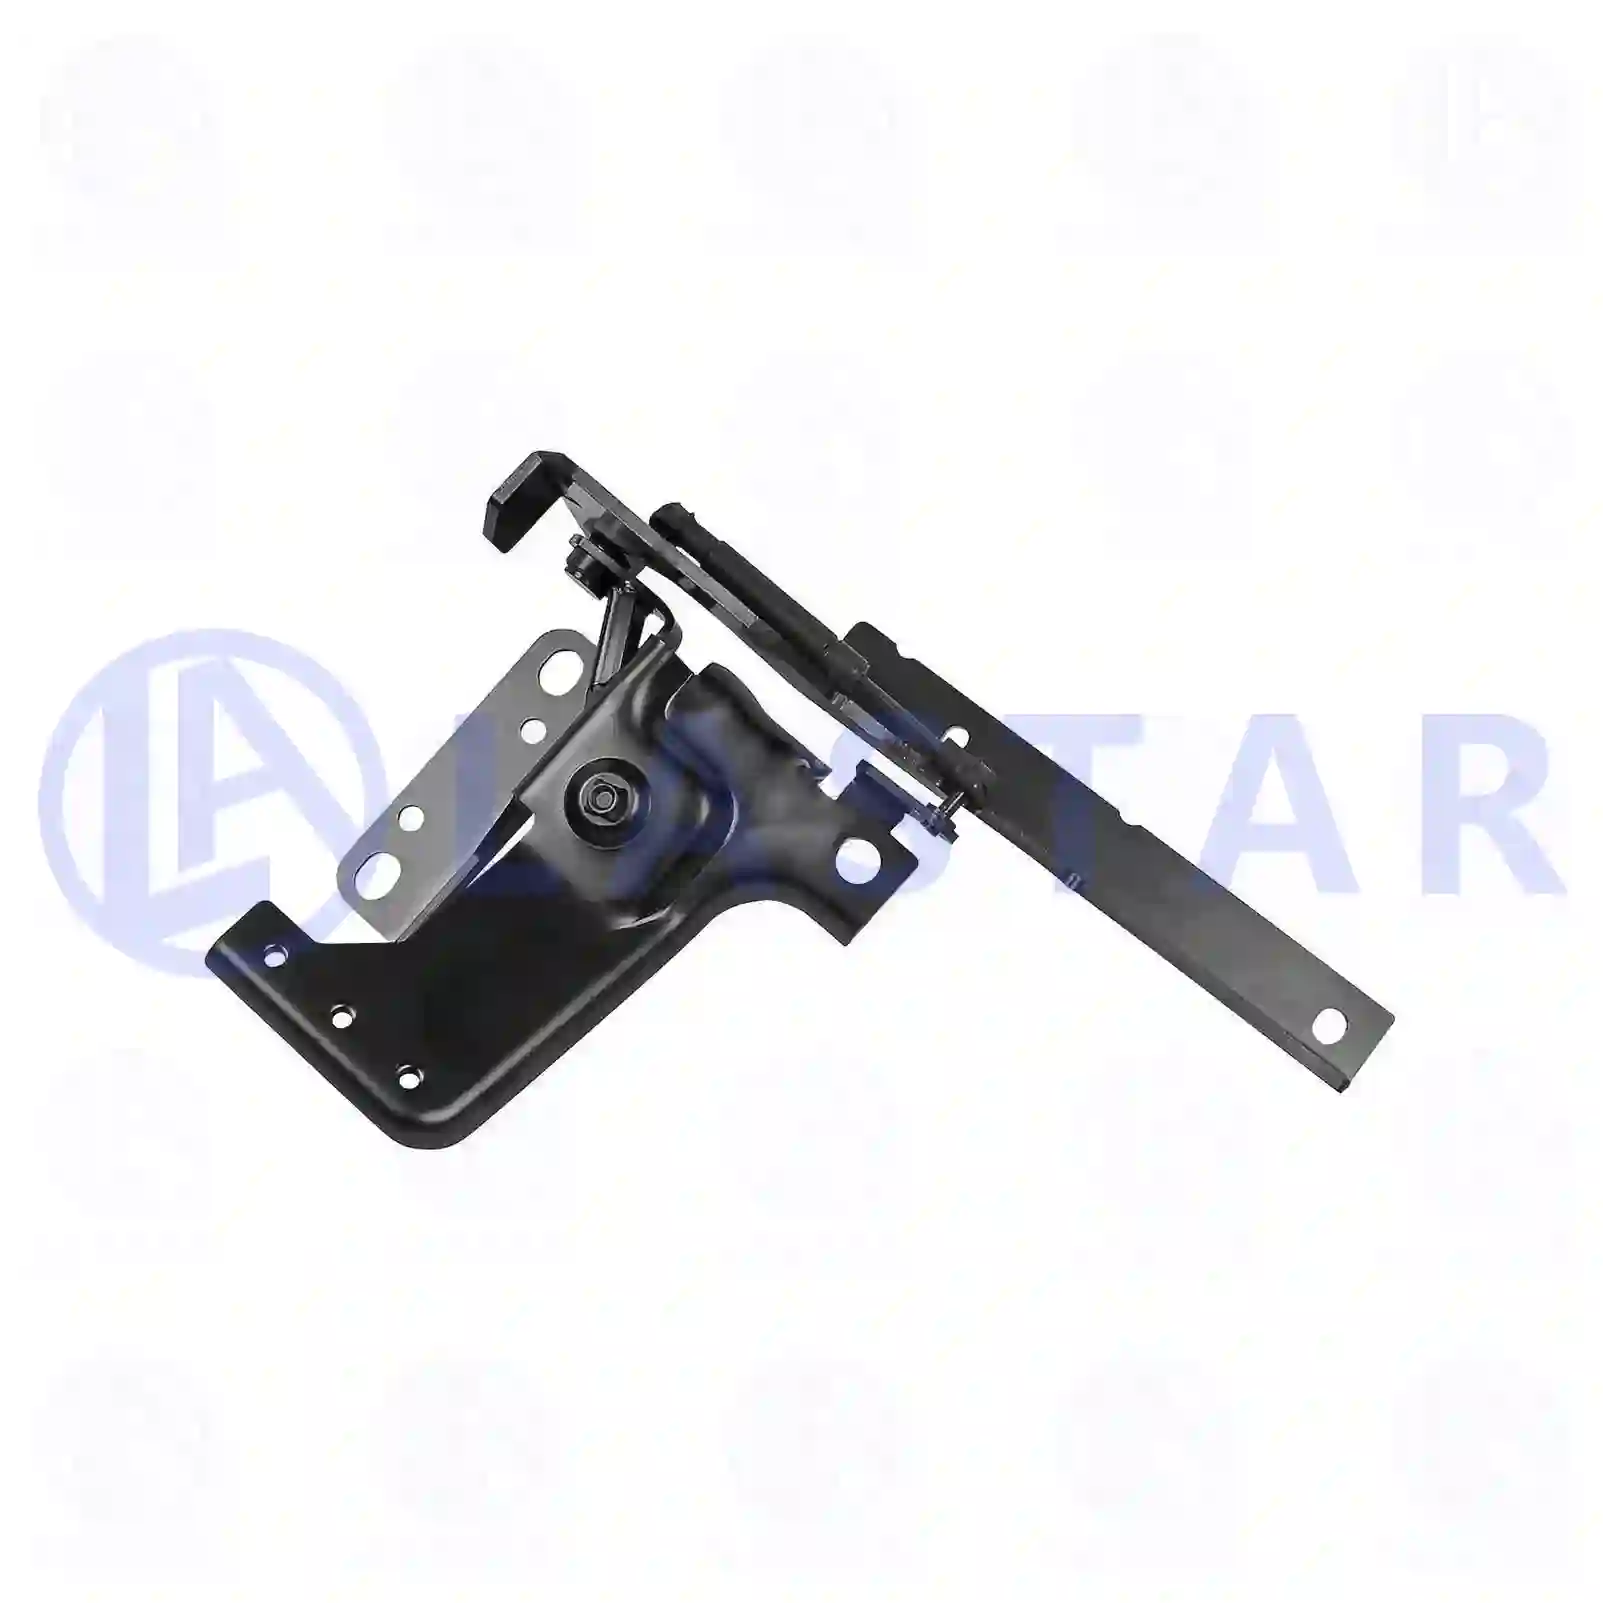 Bracket, front grill, lower, right, 77721662, 1451586, 1727264 ||  77721662 Lastar Spare Part | Truck Spare Parts, Auotomotive Spare Parts Bracket, front grill, lower, right, 77721662, 1451586, 1727264 ||  77721662 Lastar Spare Part | Truck Spare Parts, Auotomotive Spare Parts